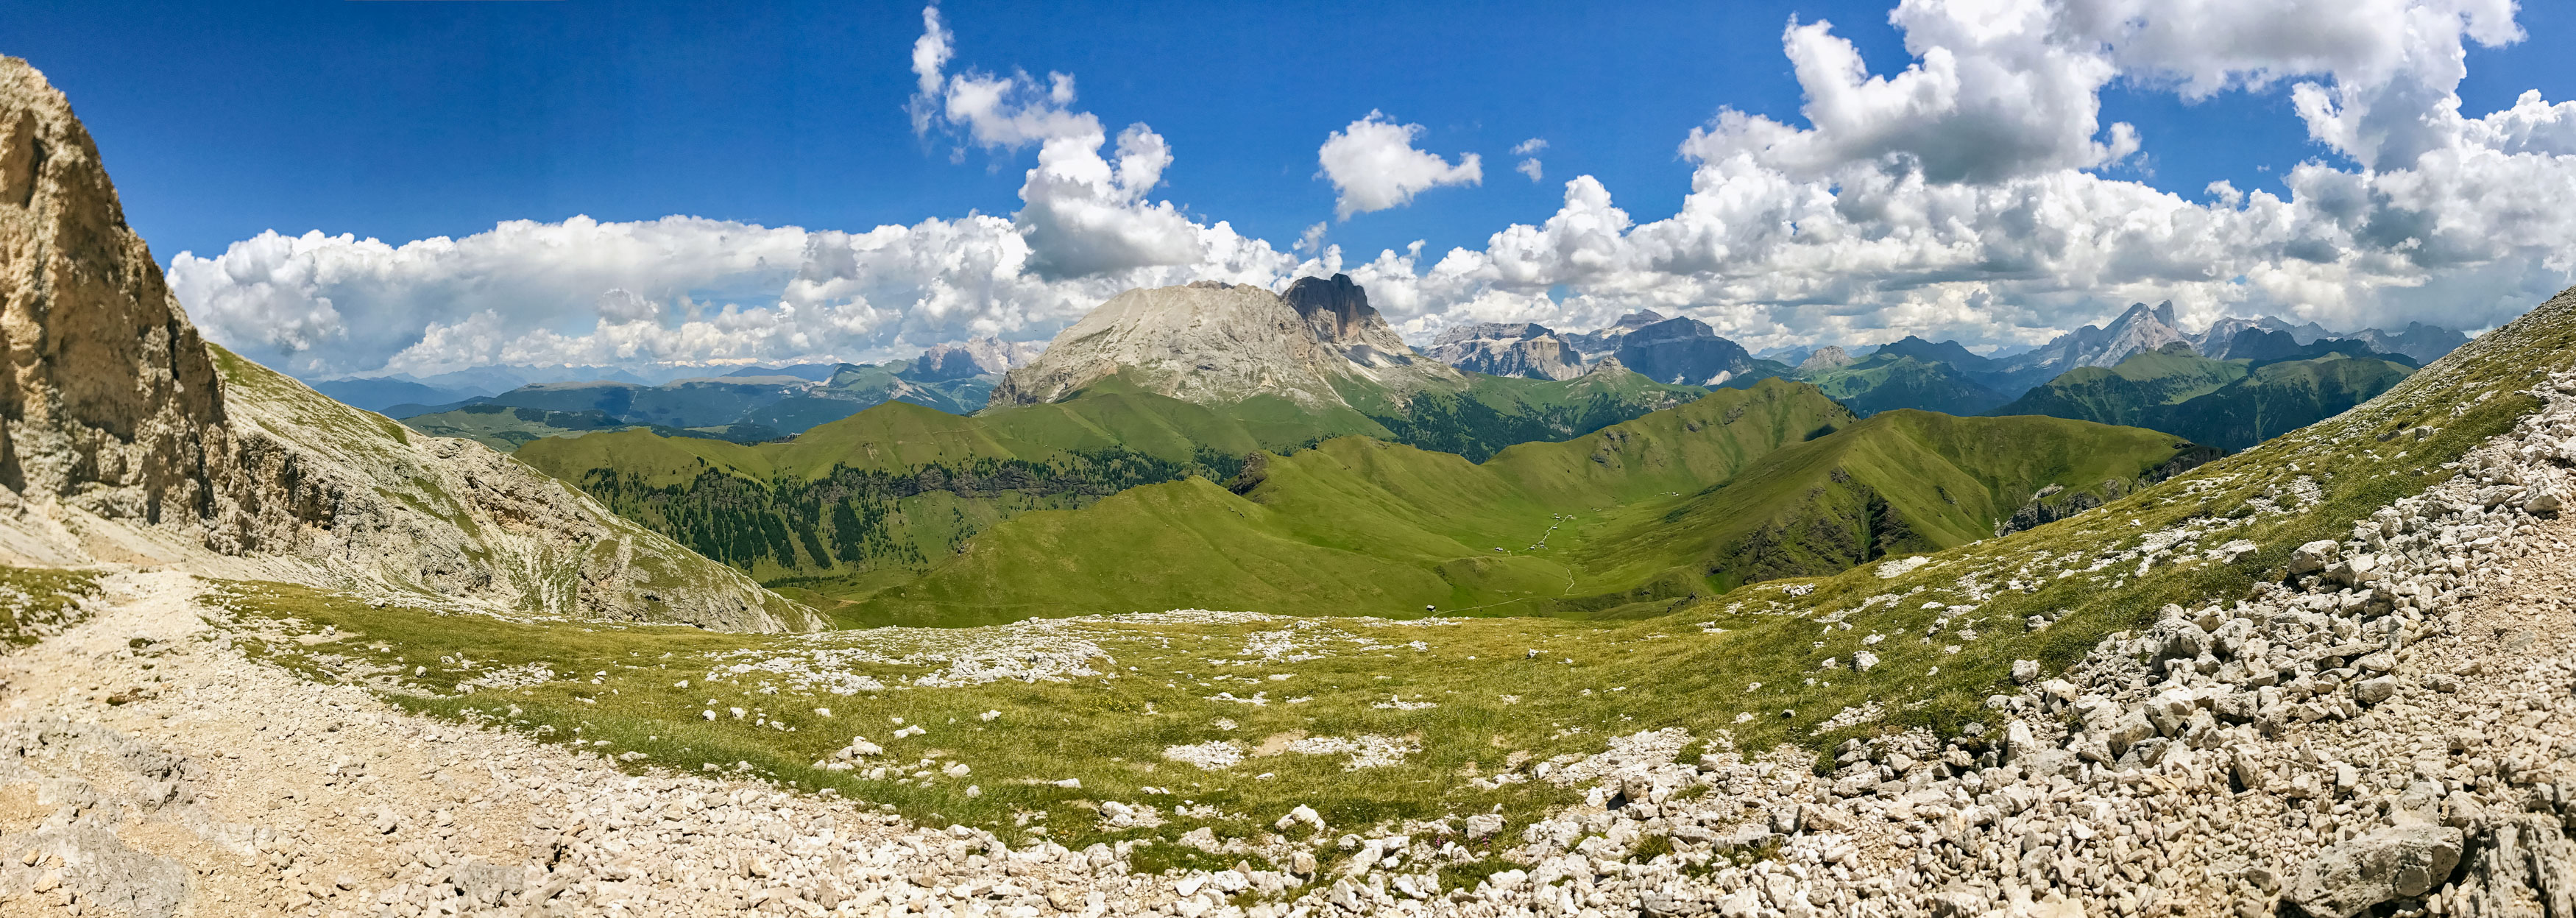 Panorama view looking towards the Sassopiato and green valleys